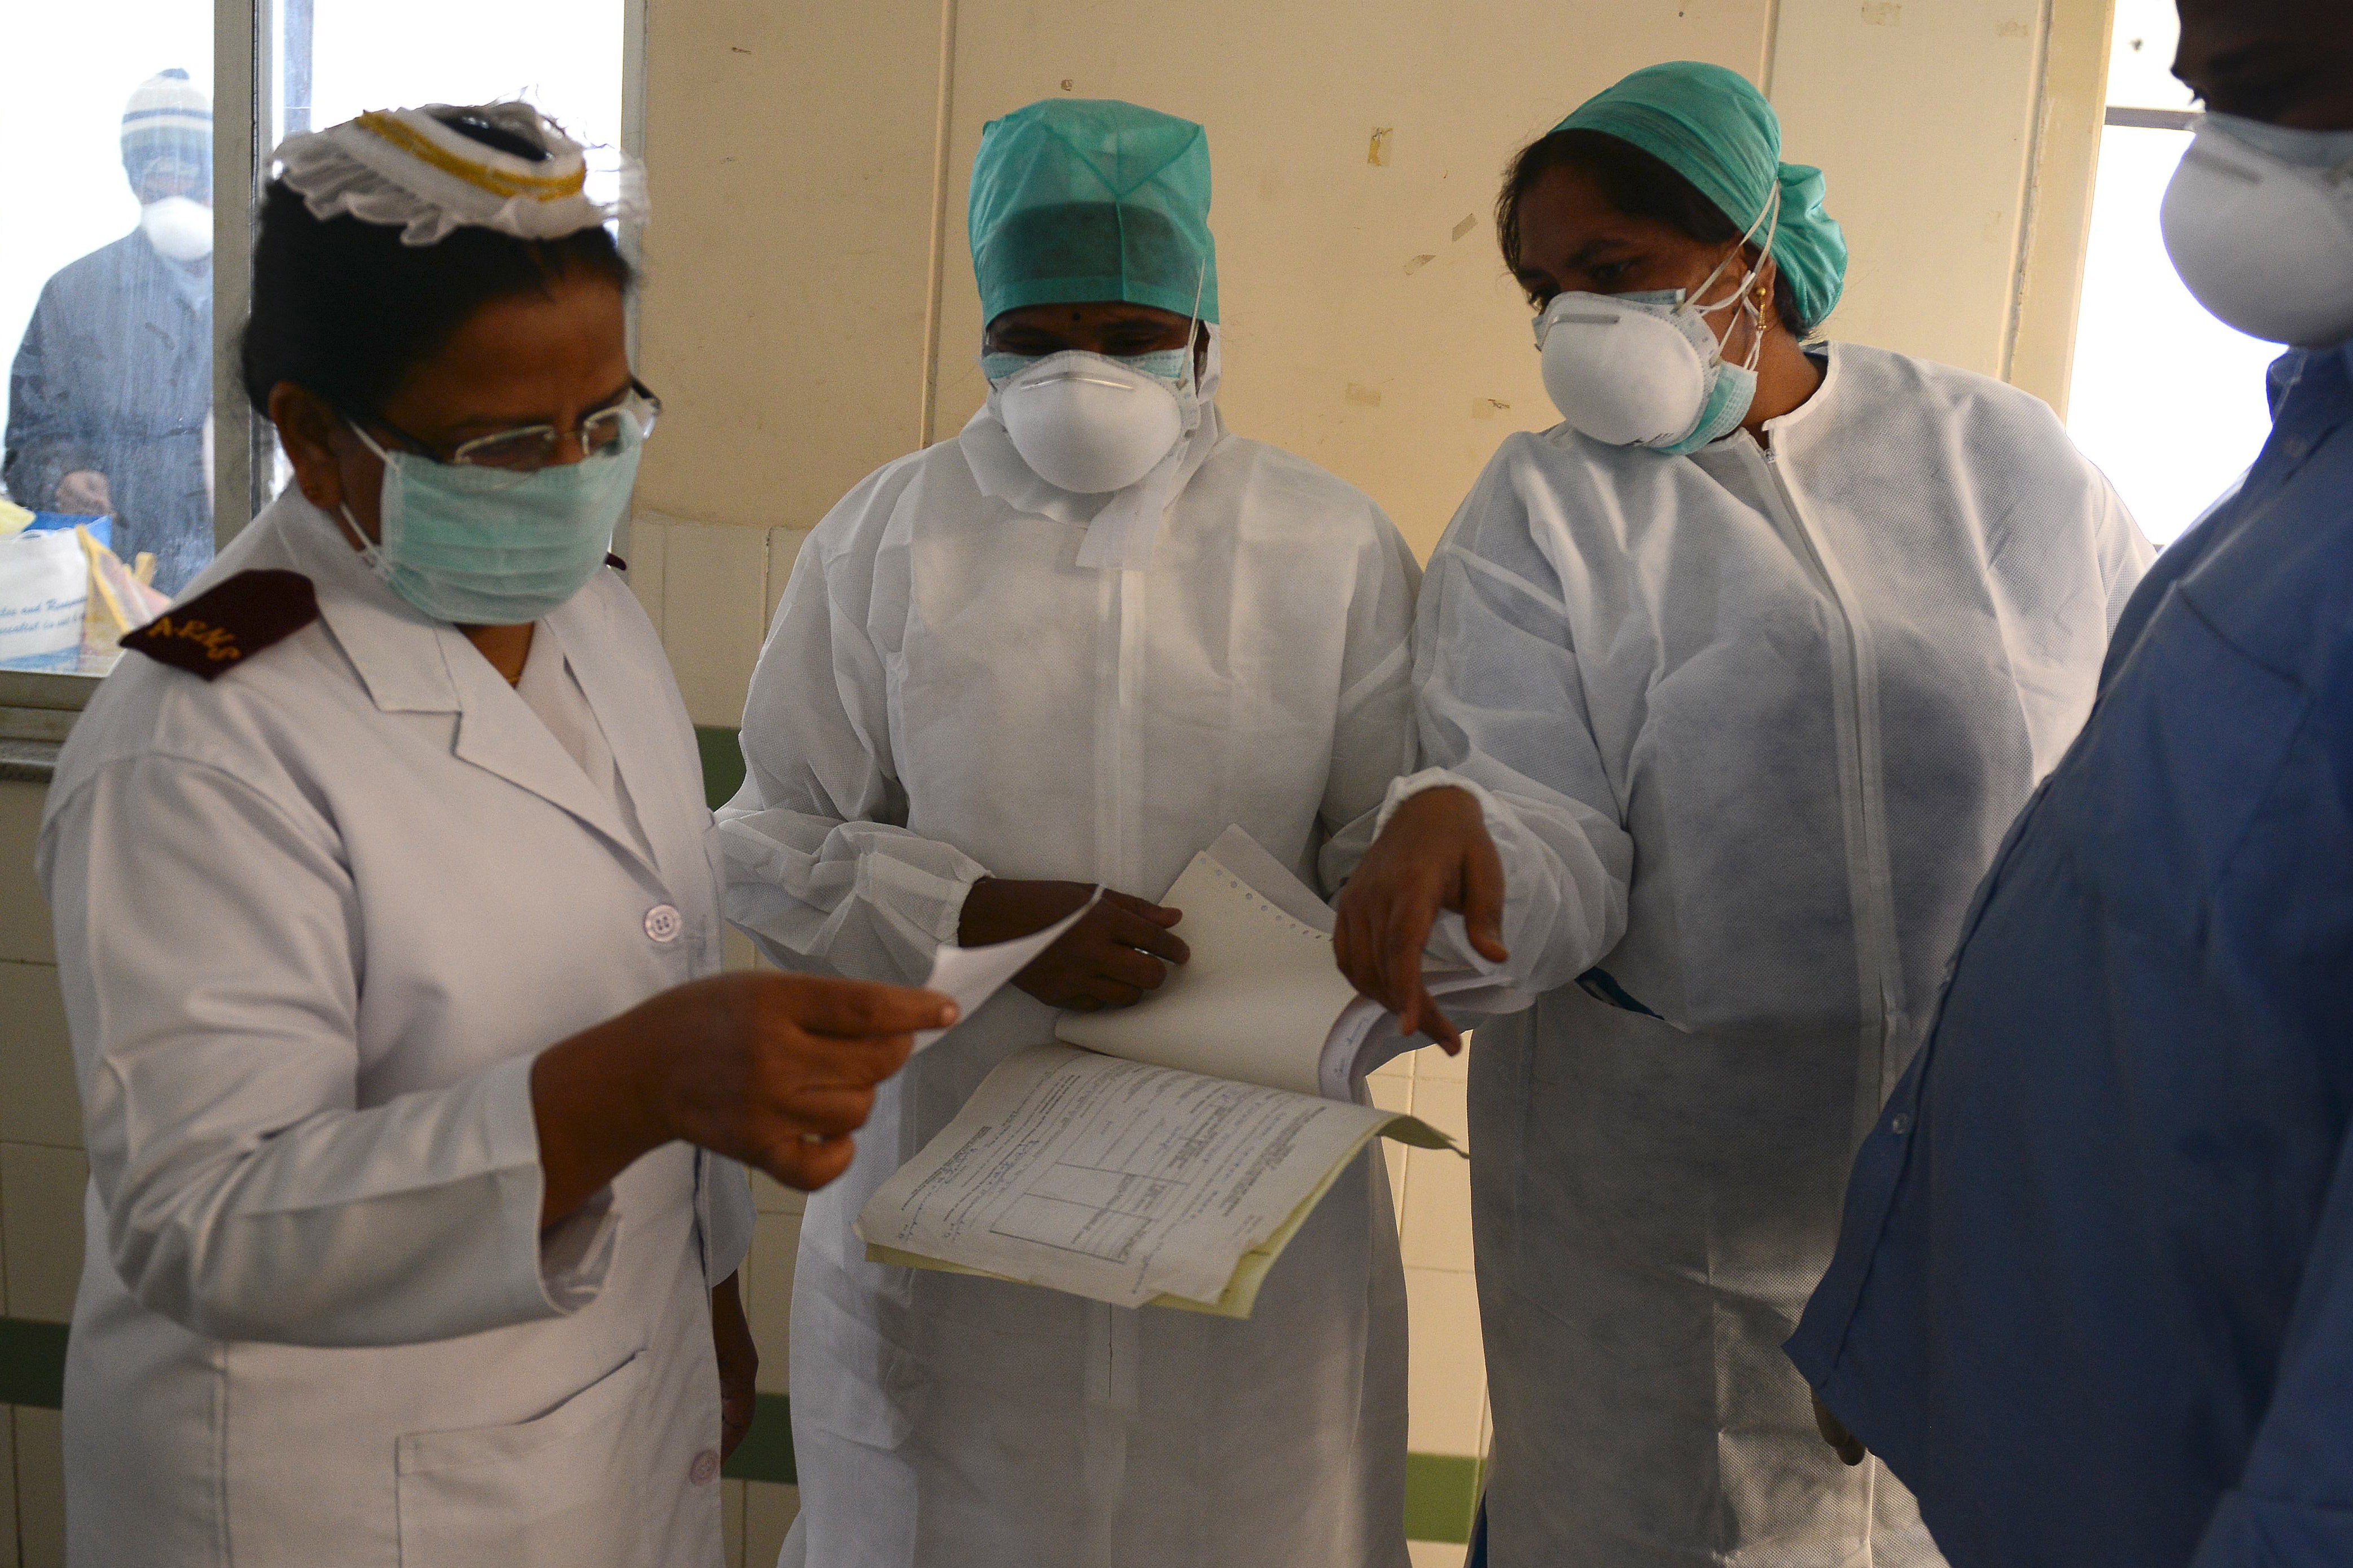 Indian health professionals inspect the case sheet of a swine flu patient at a ward at the Gandhi Hospital in Hyderabad on Jan. 21, 2015 (Noah Seelam—AFP/Getty Images)